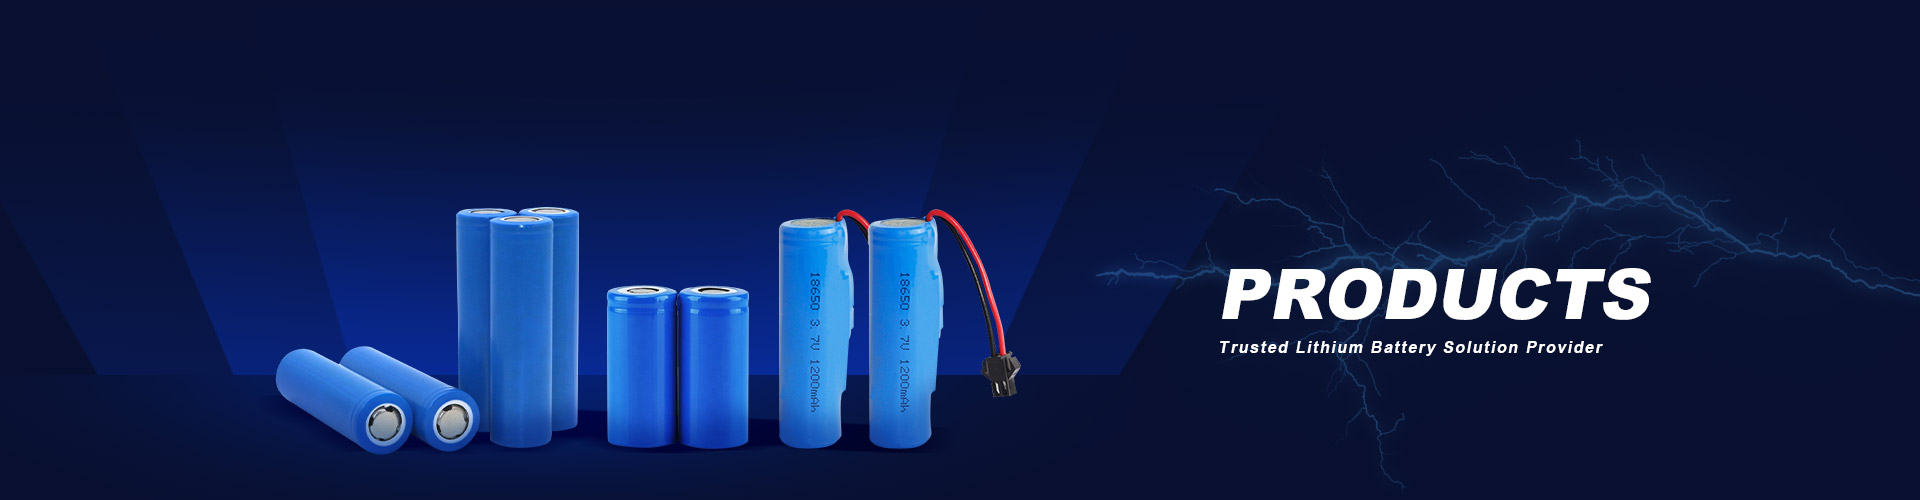 Low temperature lithium polymer battery